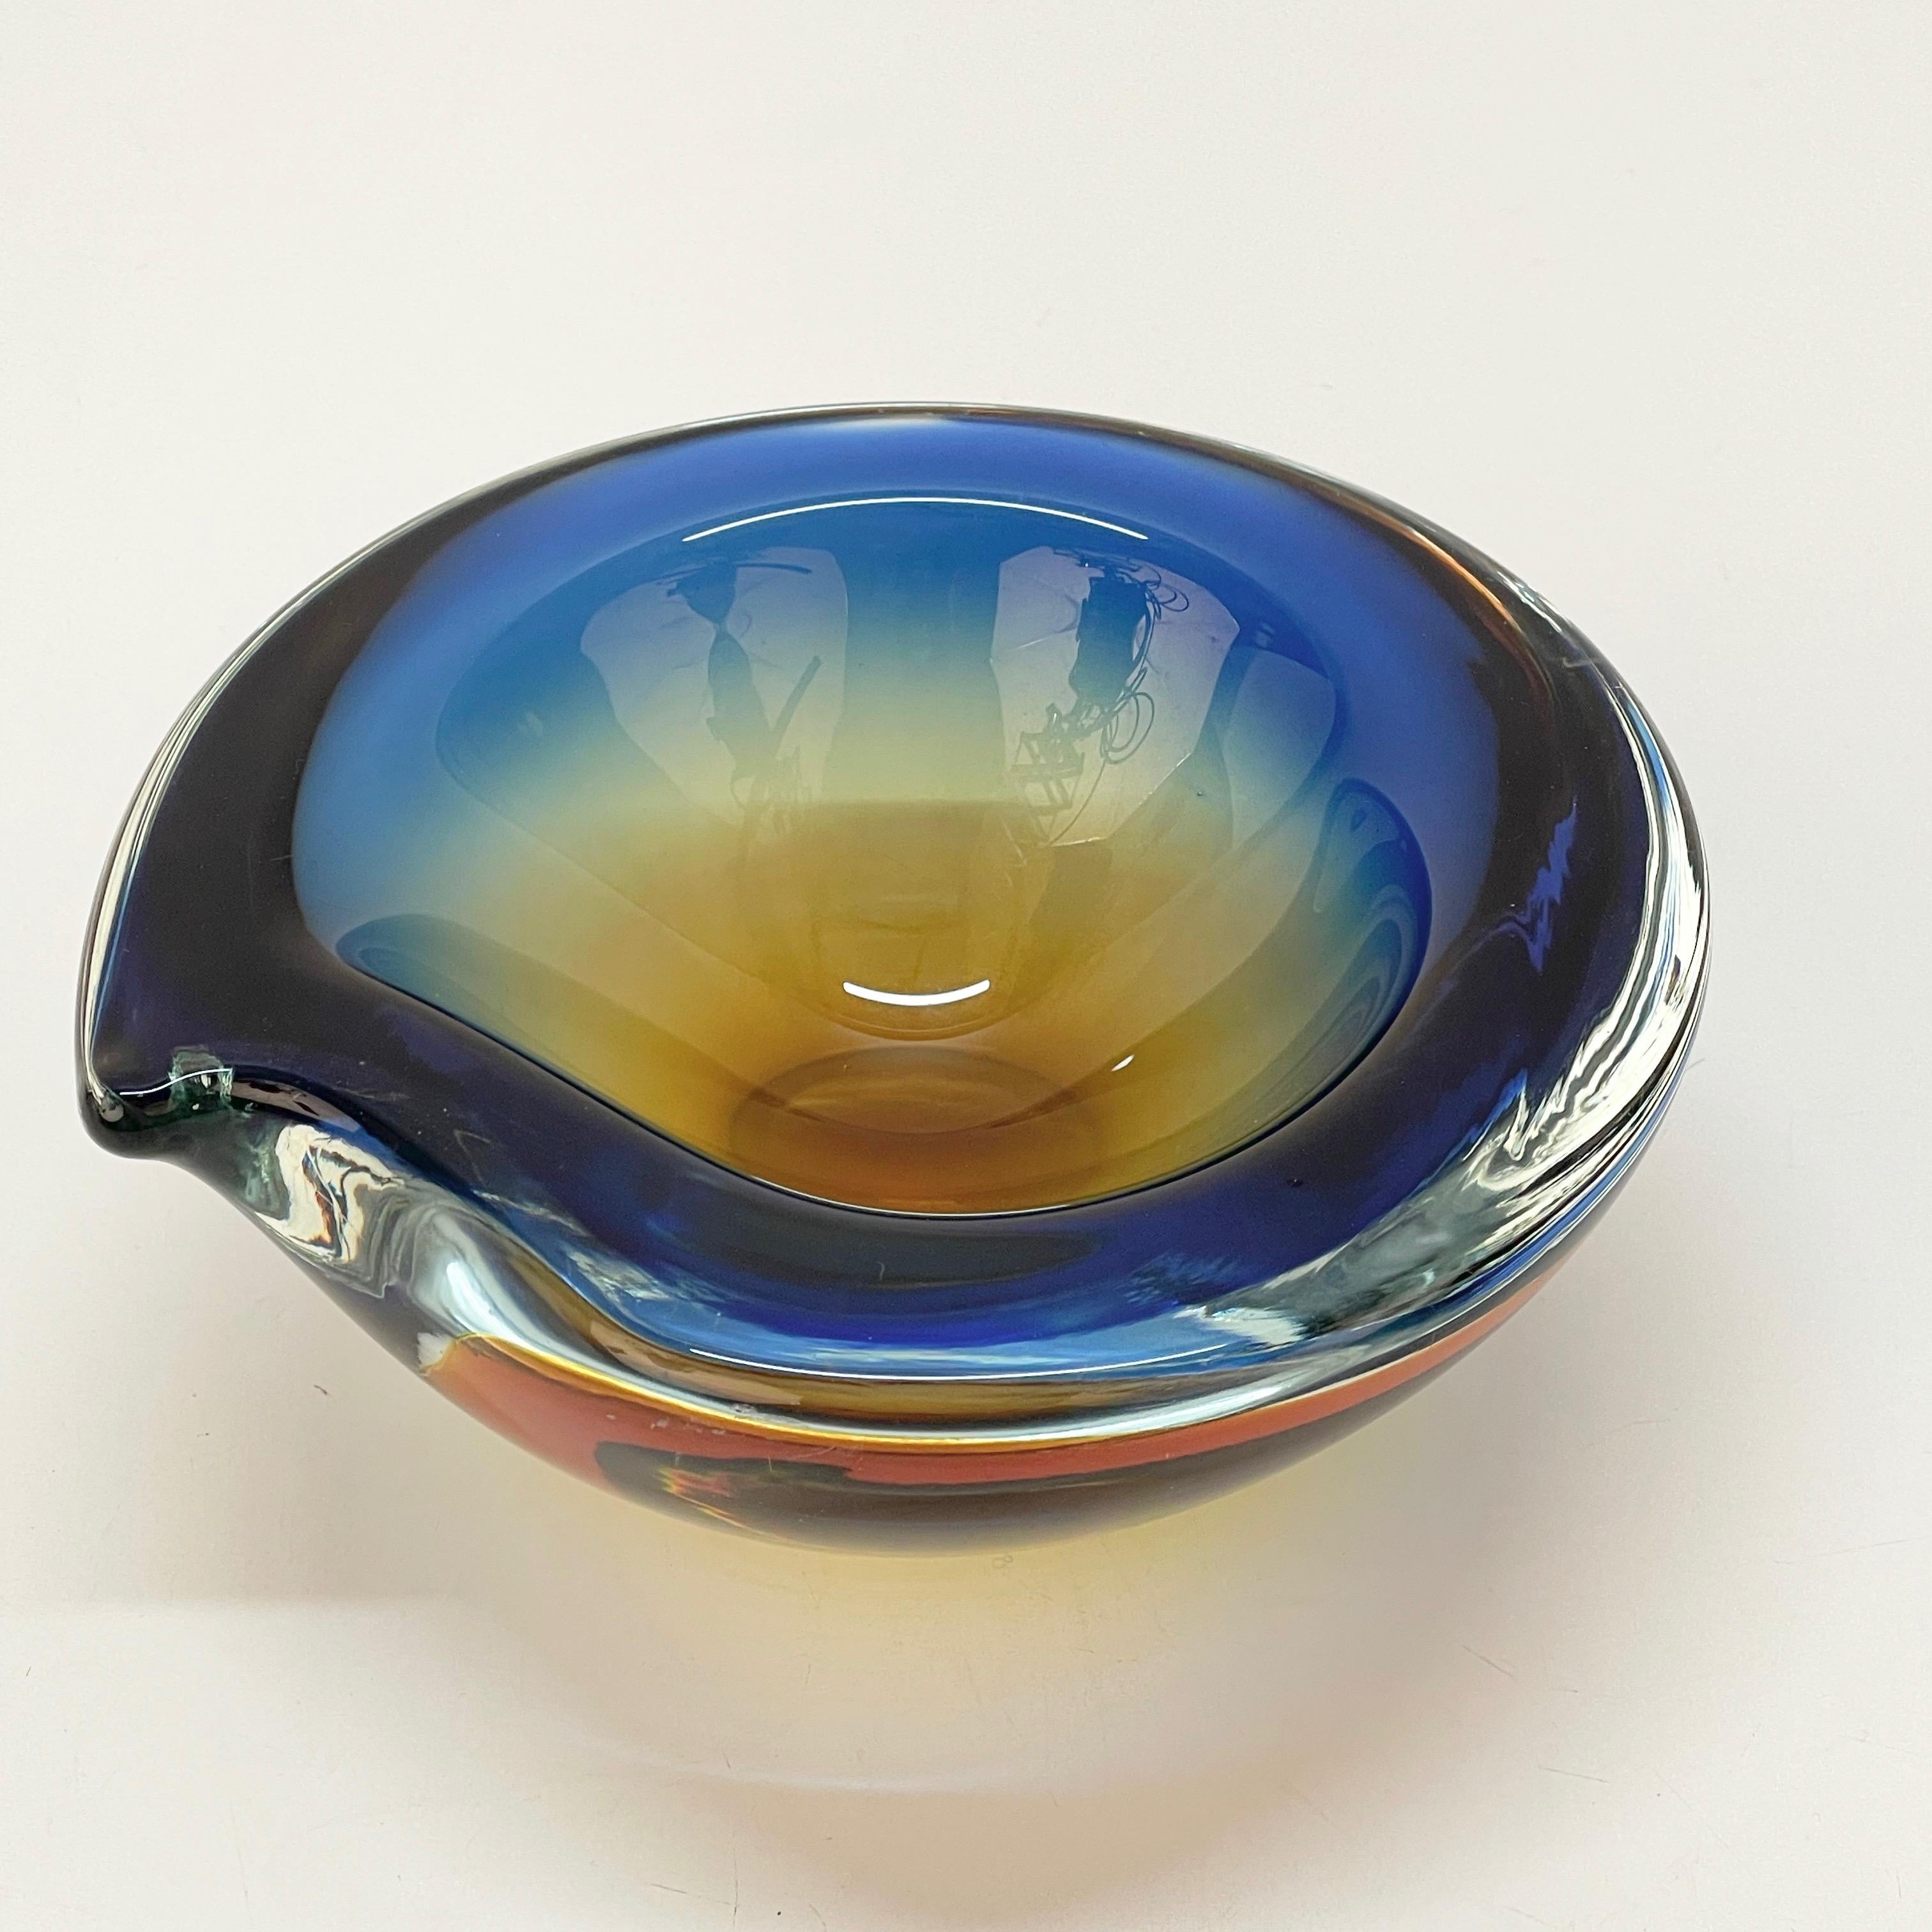 Murano Ashtray or Bowl, Flavio Poli Submerged Glass Amber Blue, Italy, 1960 For Sale 2